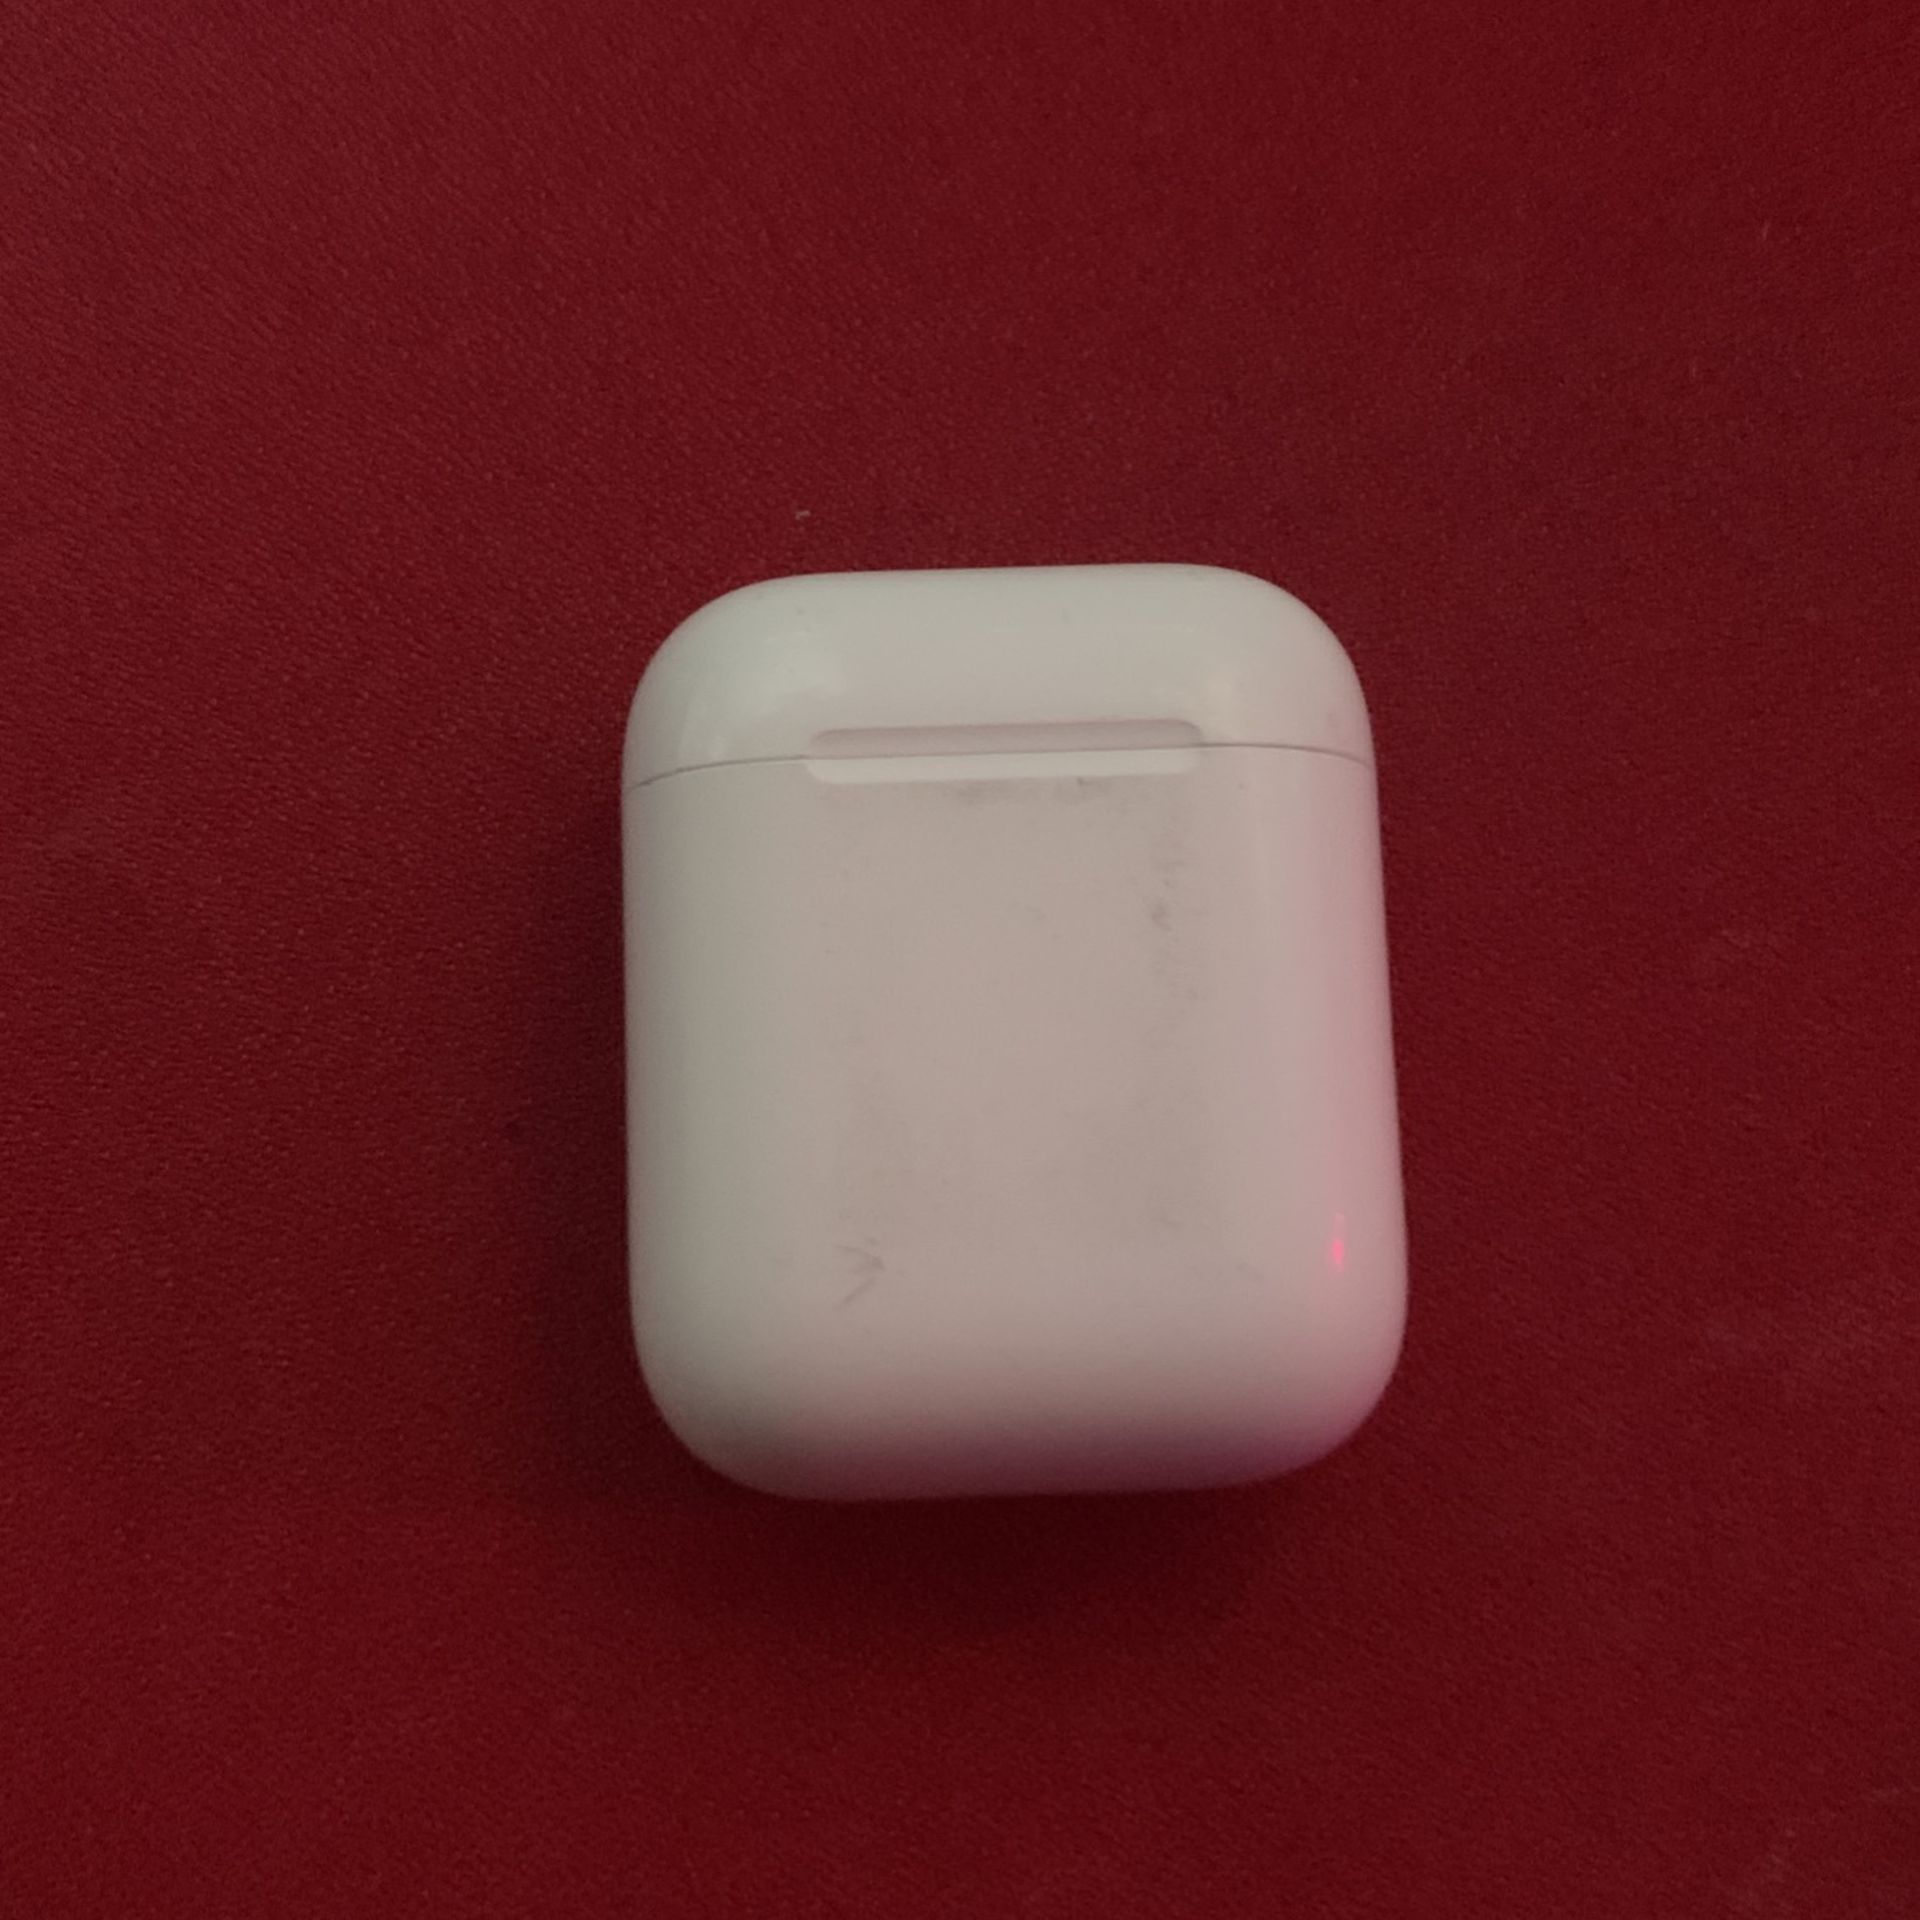 AirPods Used With 1 Airpod